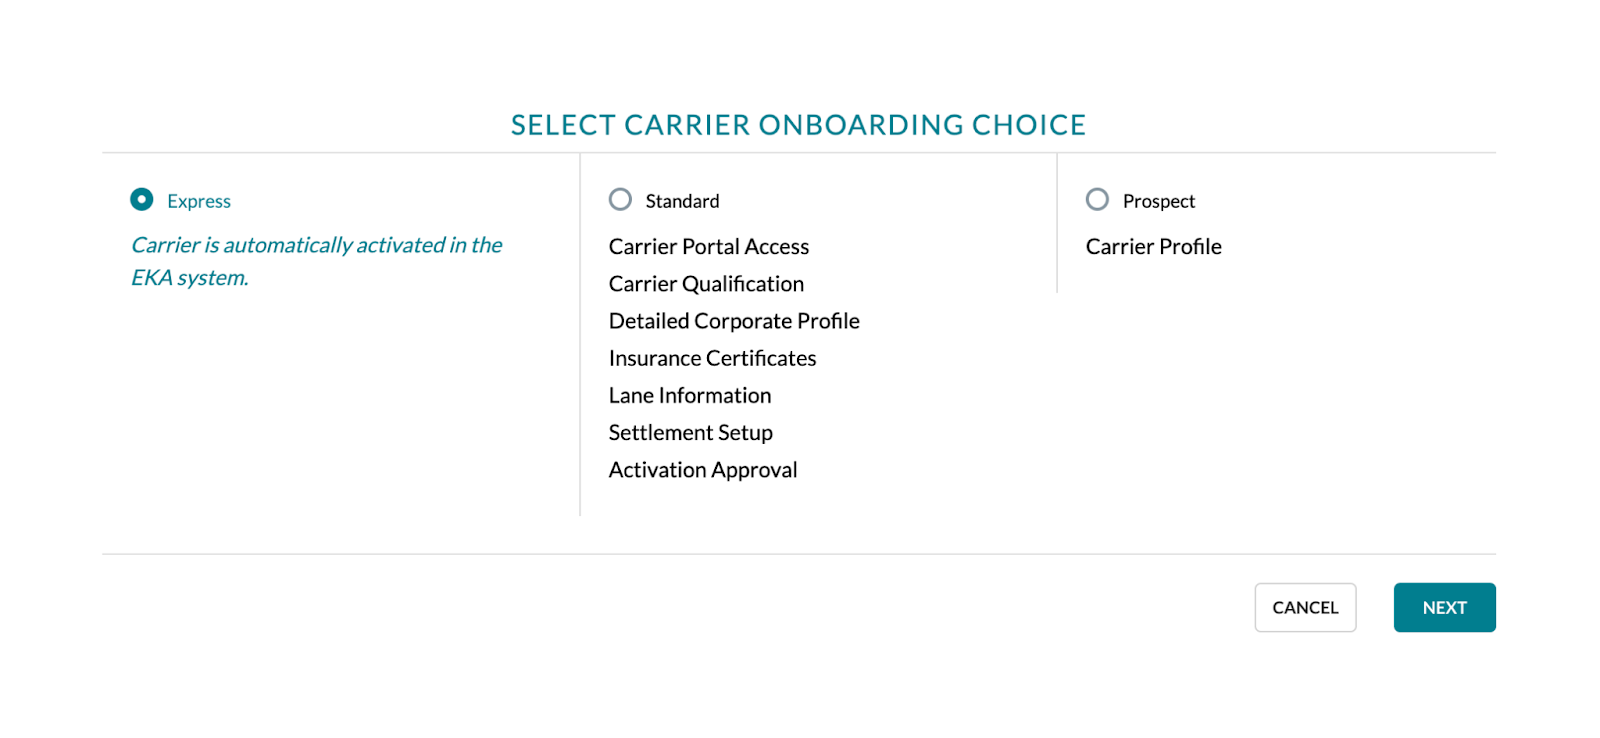 carrier_onboarding_choice.png